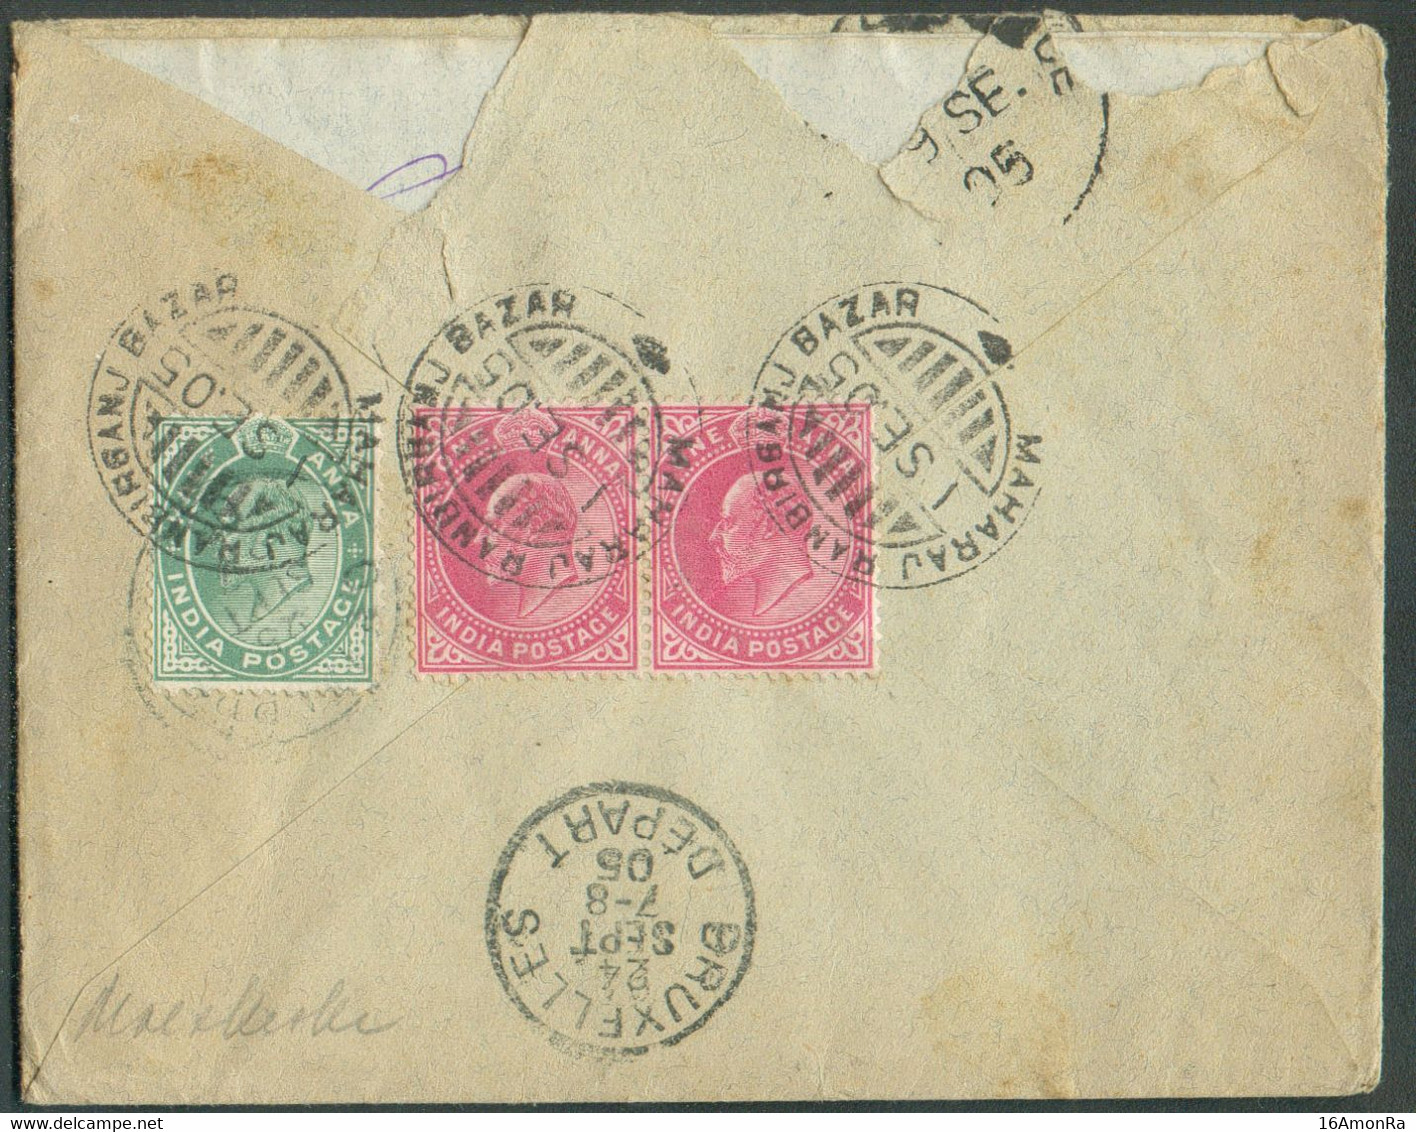 King Edouard ½p. + 1p. (pair) Cancelled MAHARAJ RAMRANBIRGANJ BAZAR On The Back Of A Cover 1 Sept. 1905 To Brussels (Bel - 1902-11 Roi Edouard VII